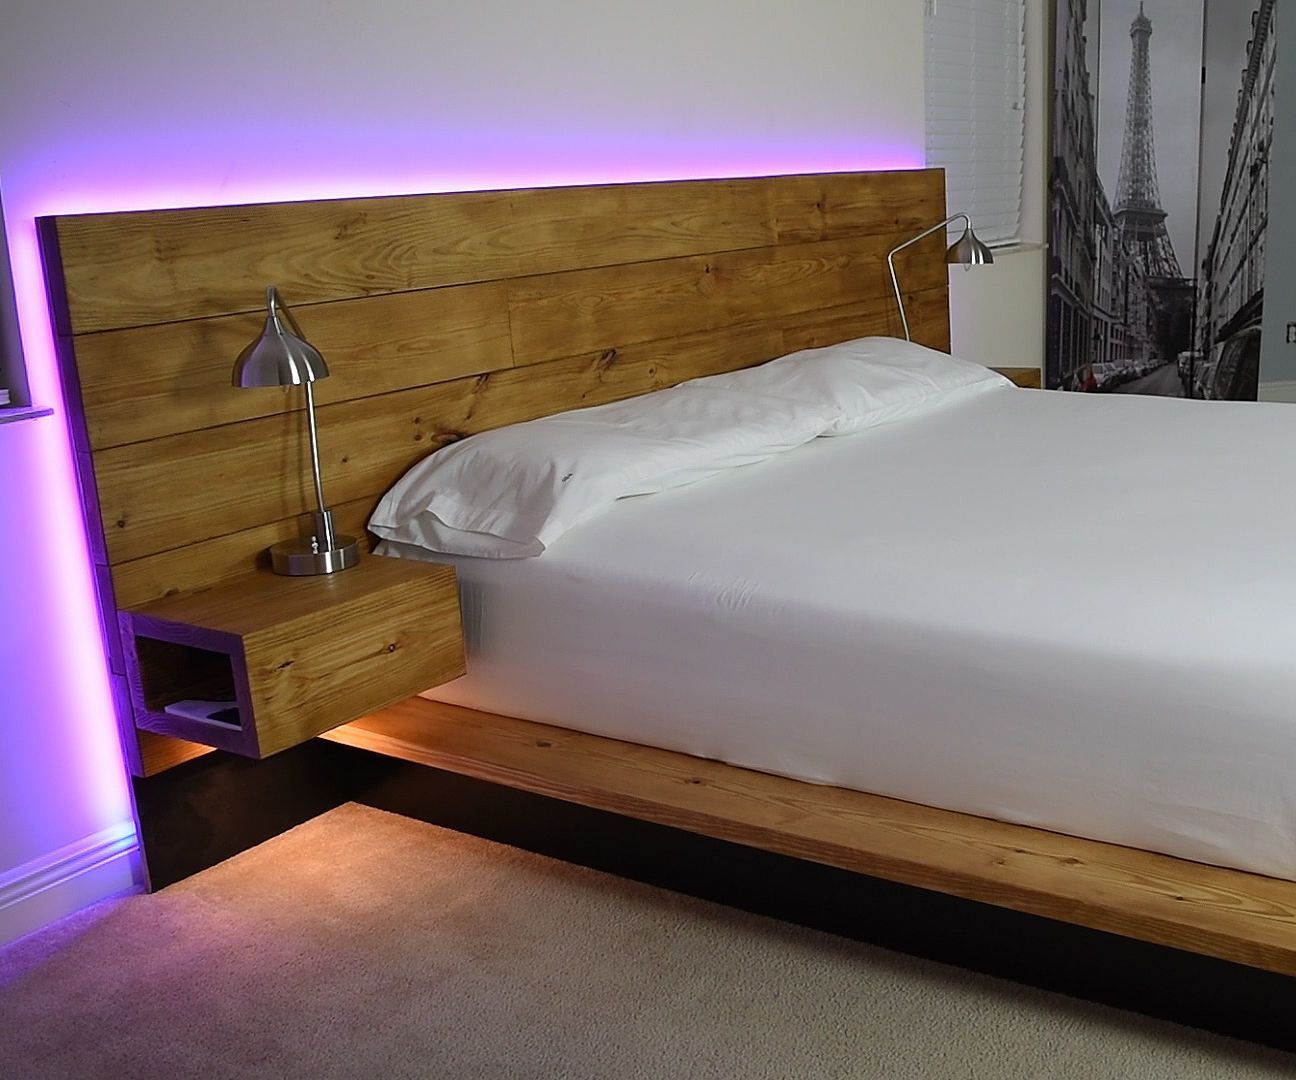 DIY Platform Bed With Floating Night Stands - DIY Platform Bed With Floating Night Stands -   16 diy Bed Frame with night stand ideas